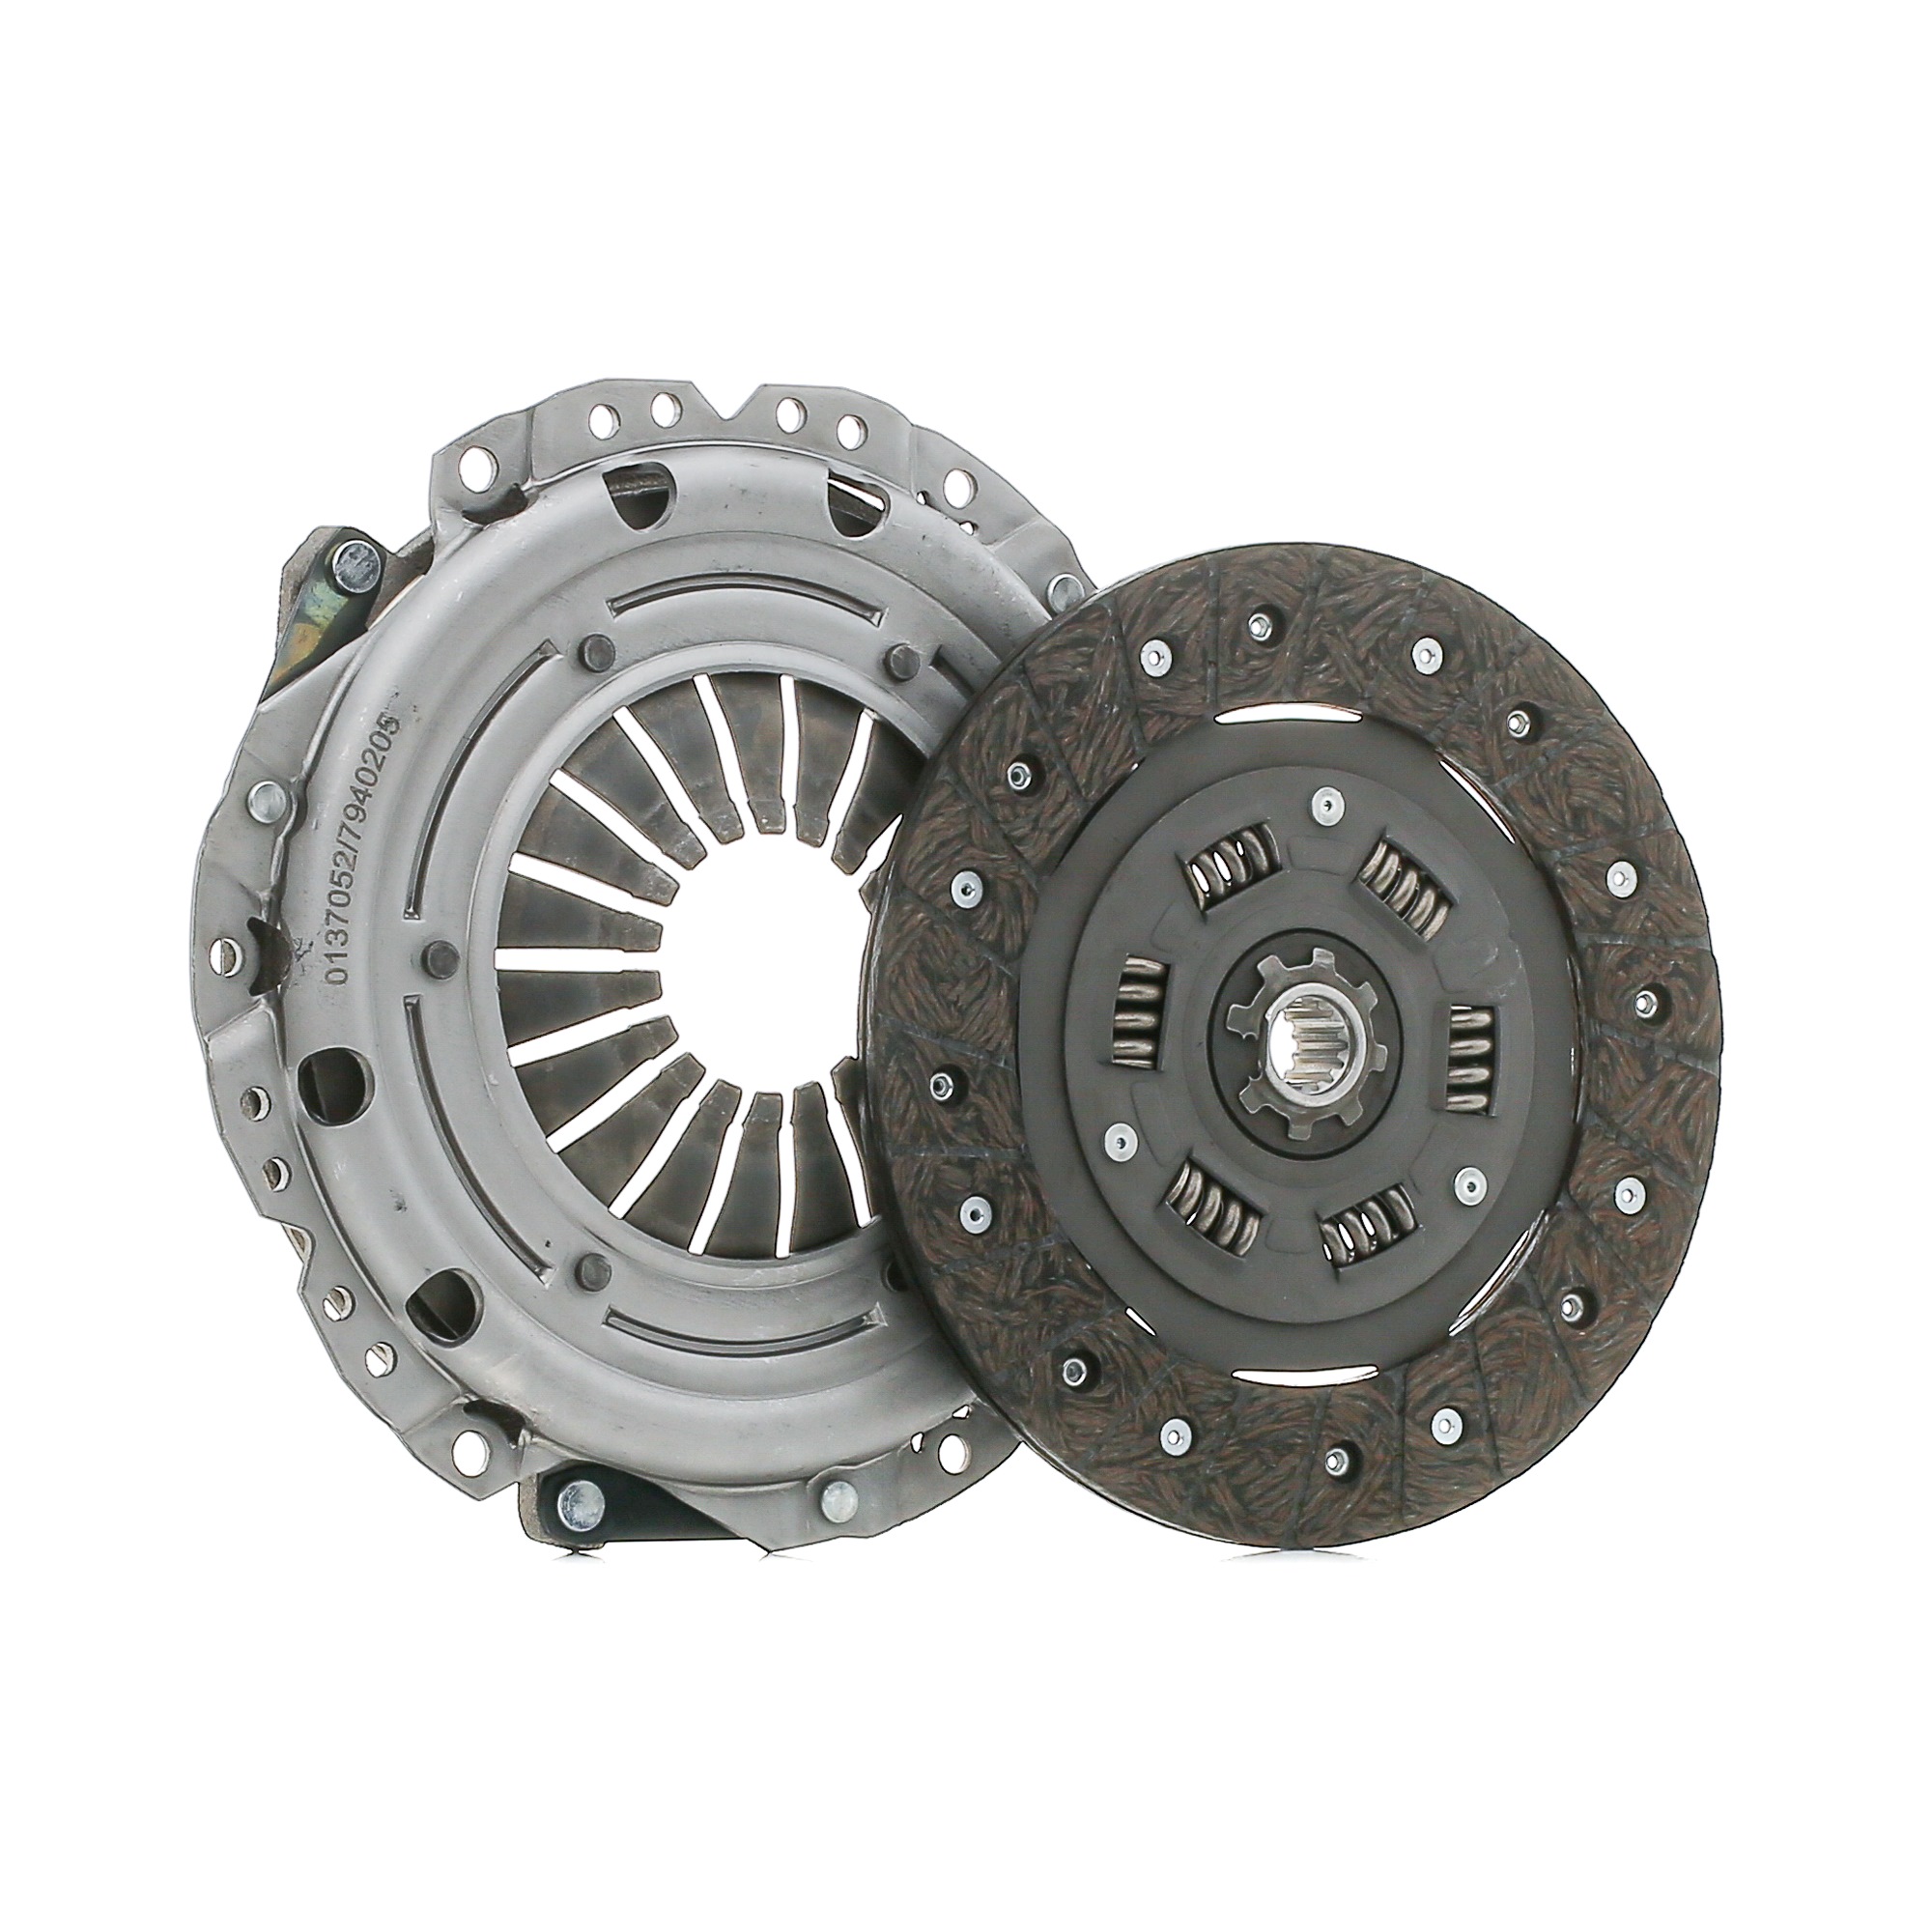 SKCK-0100057 STARK Clutch set SAAB two-piece, with clutch pressure plate, with clutch disc, 205mm